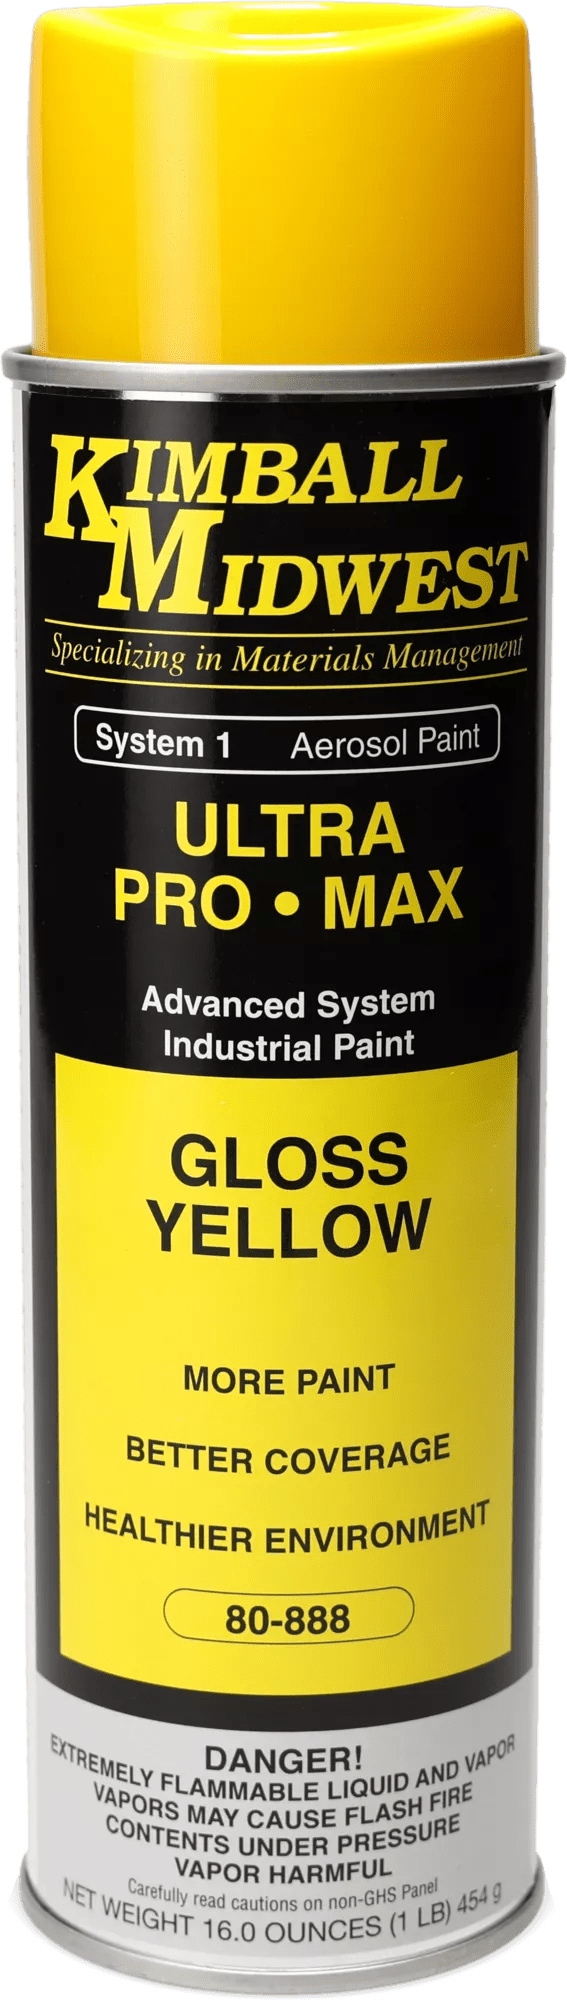 Gloss Yellow Ultra Pro•Max Oil-Based Enamel Spray Paint - 20 oz. Can